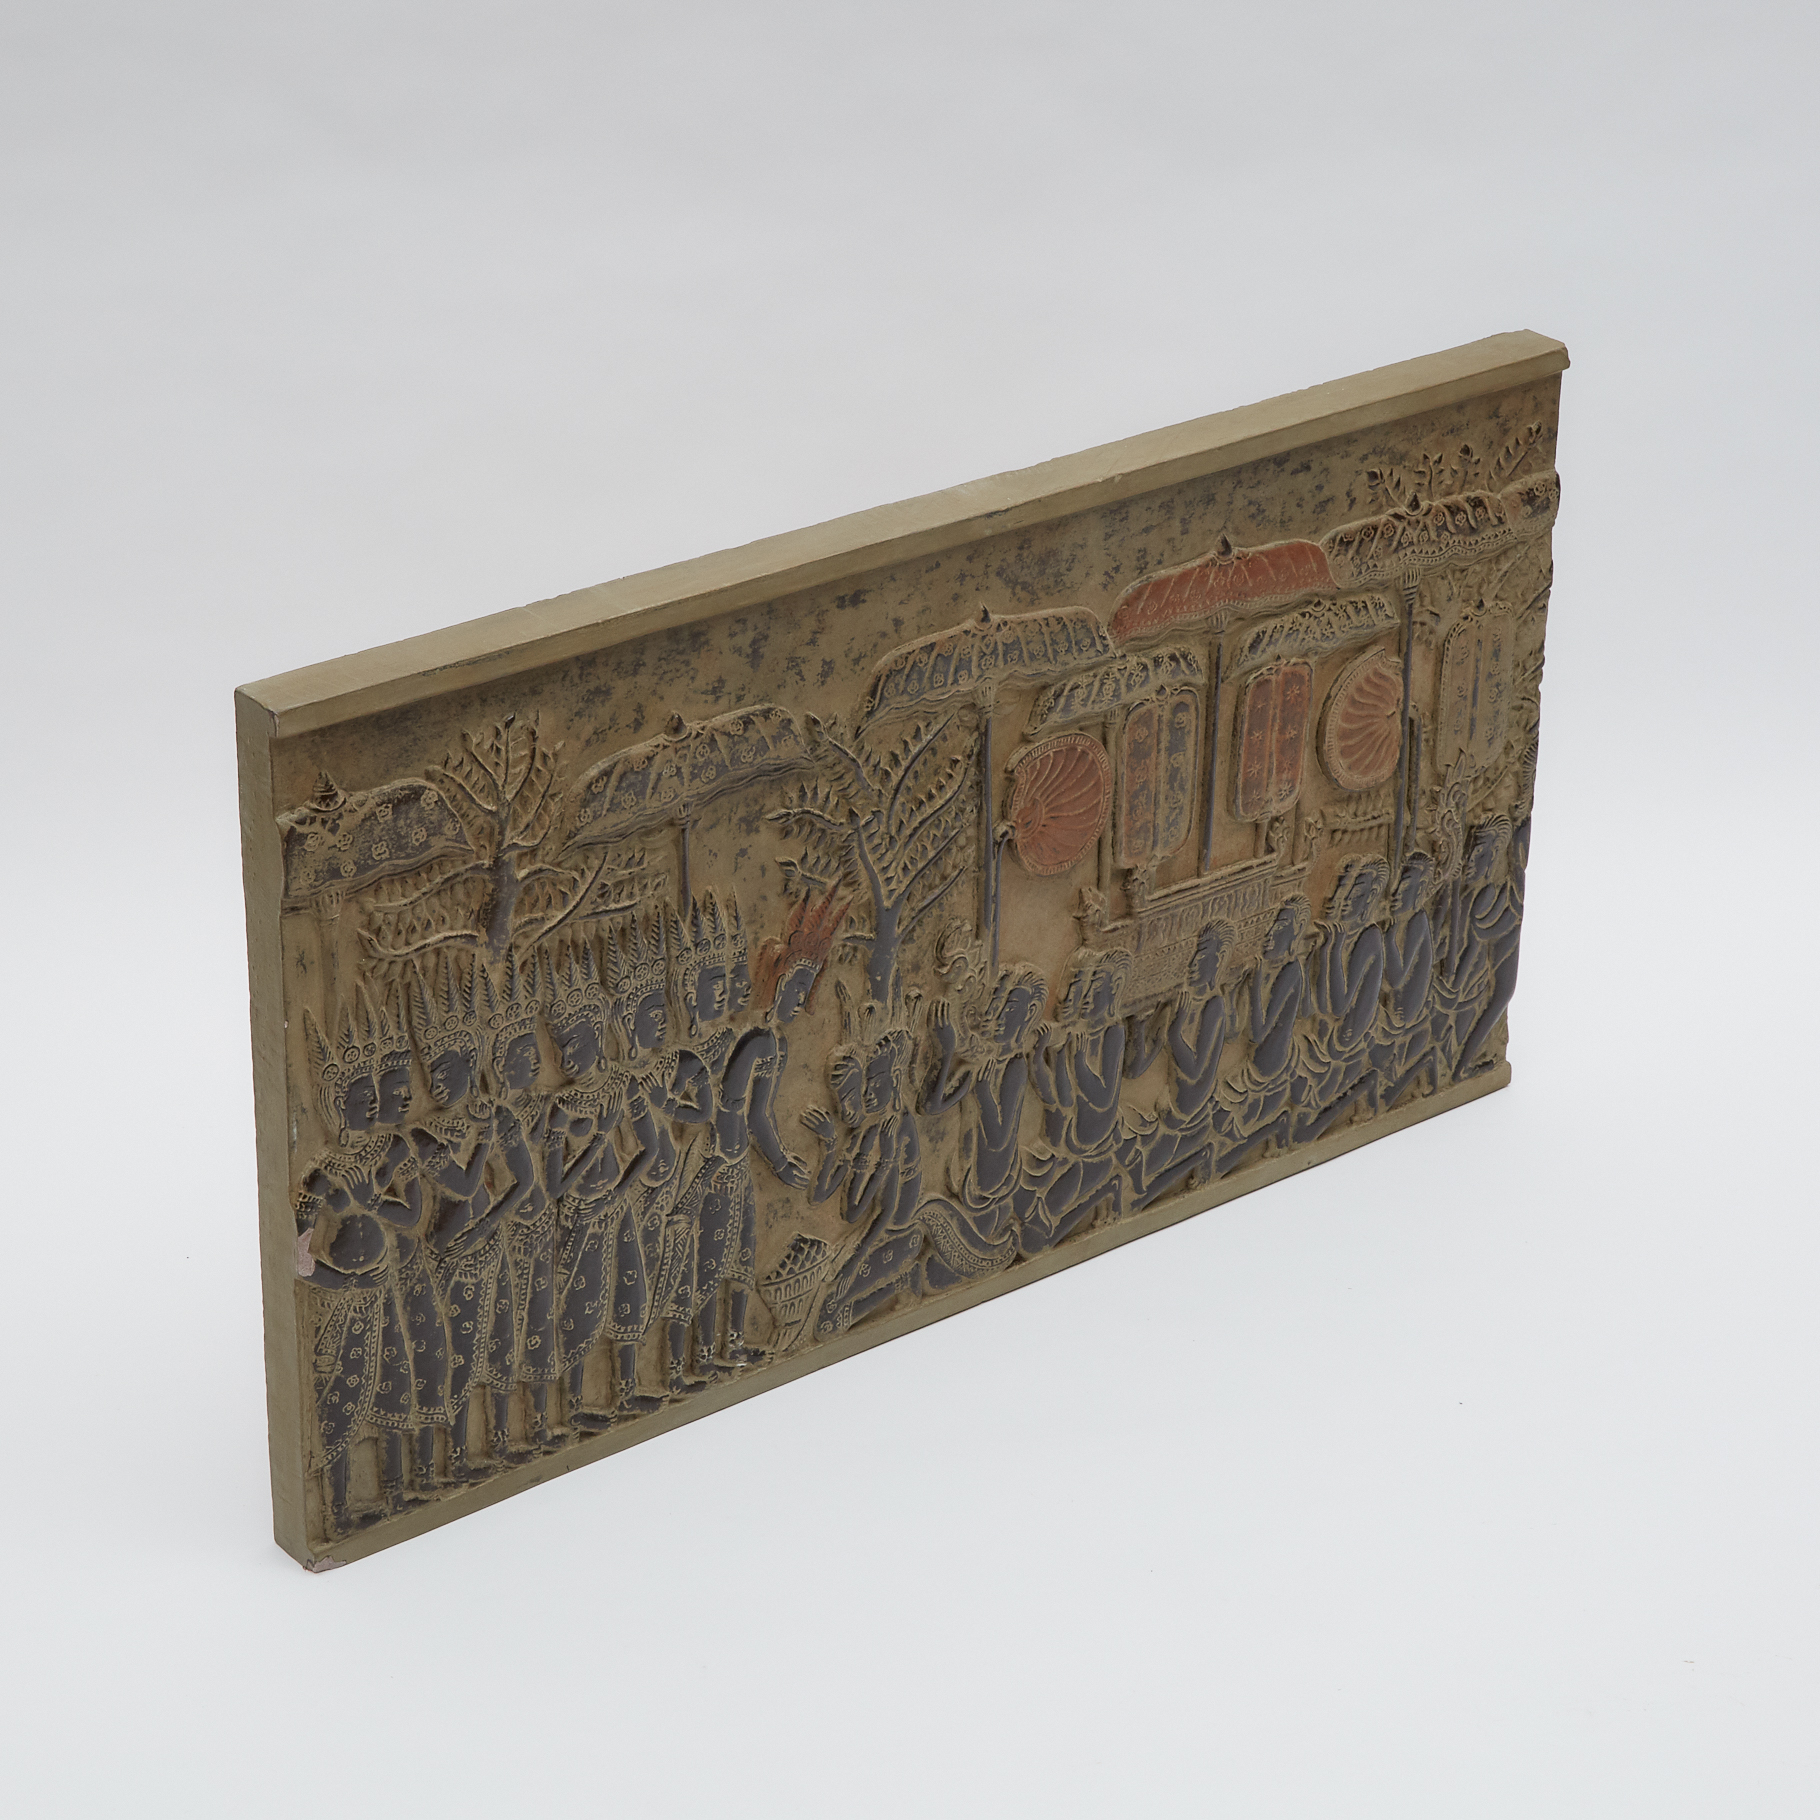 A Southeast Asian Stone Relief Carving of a Procession